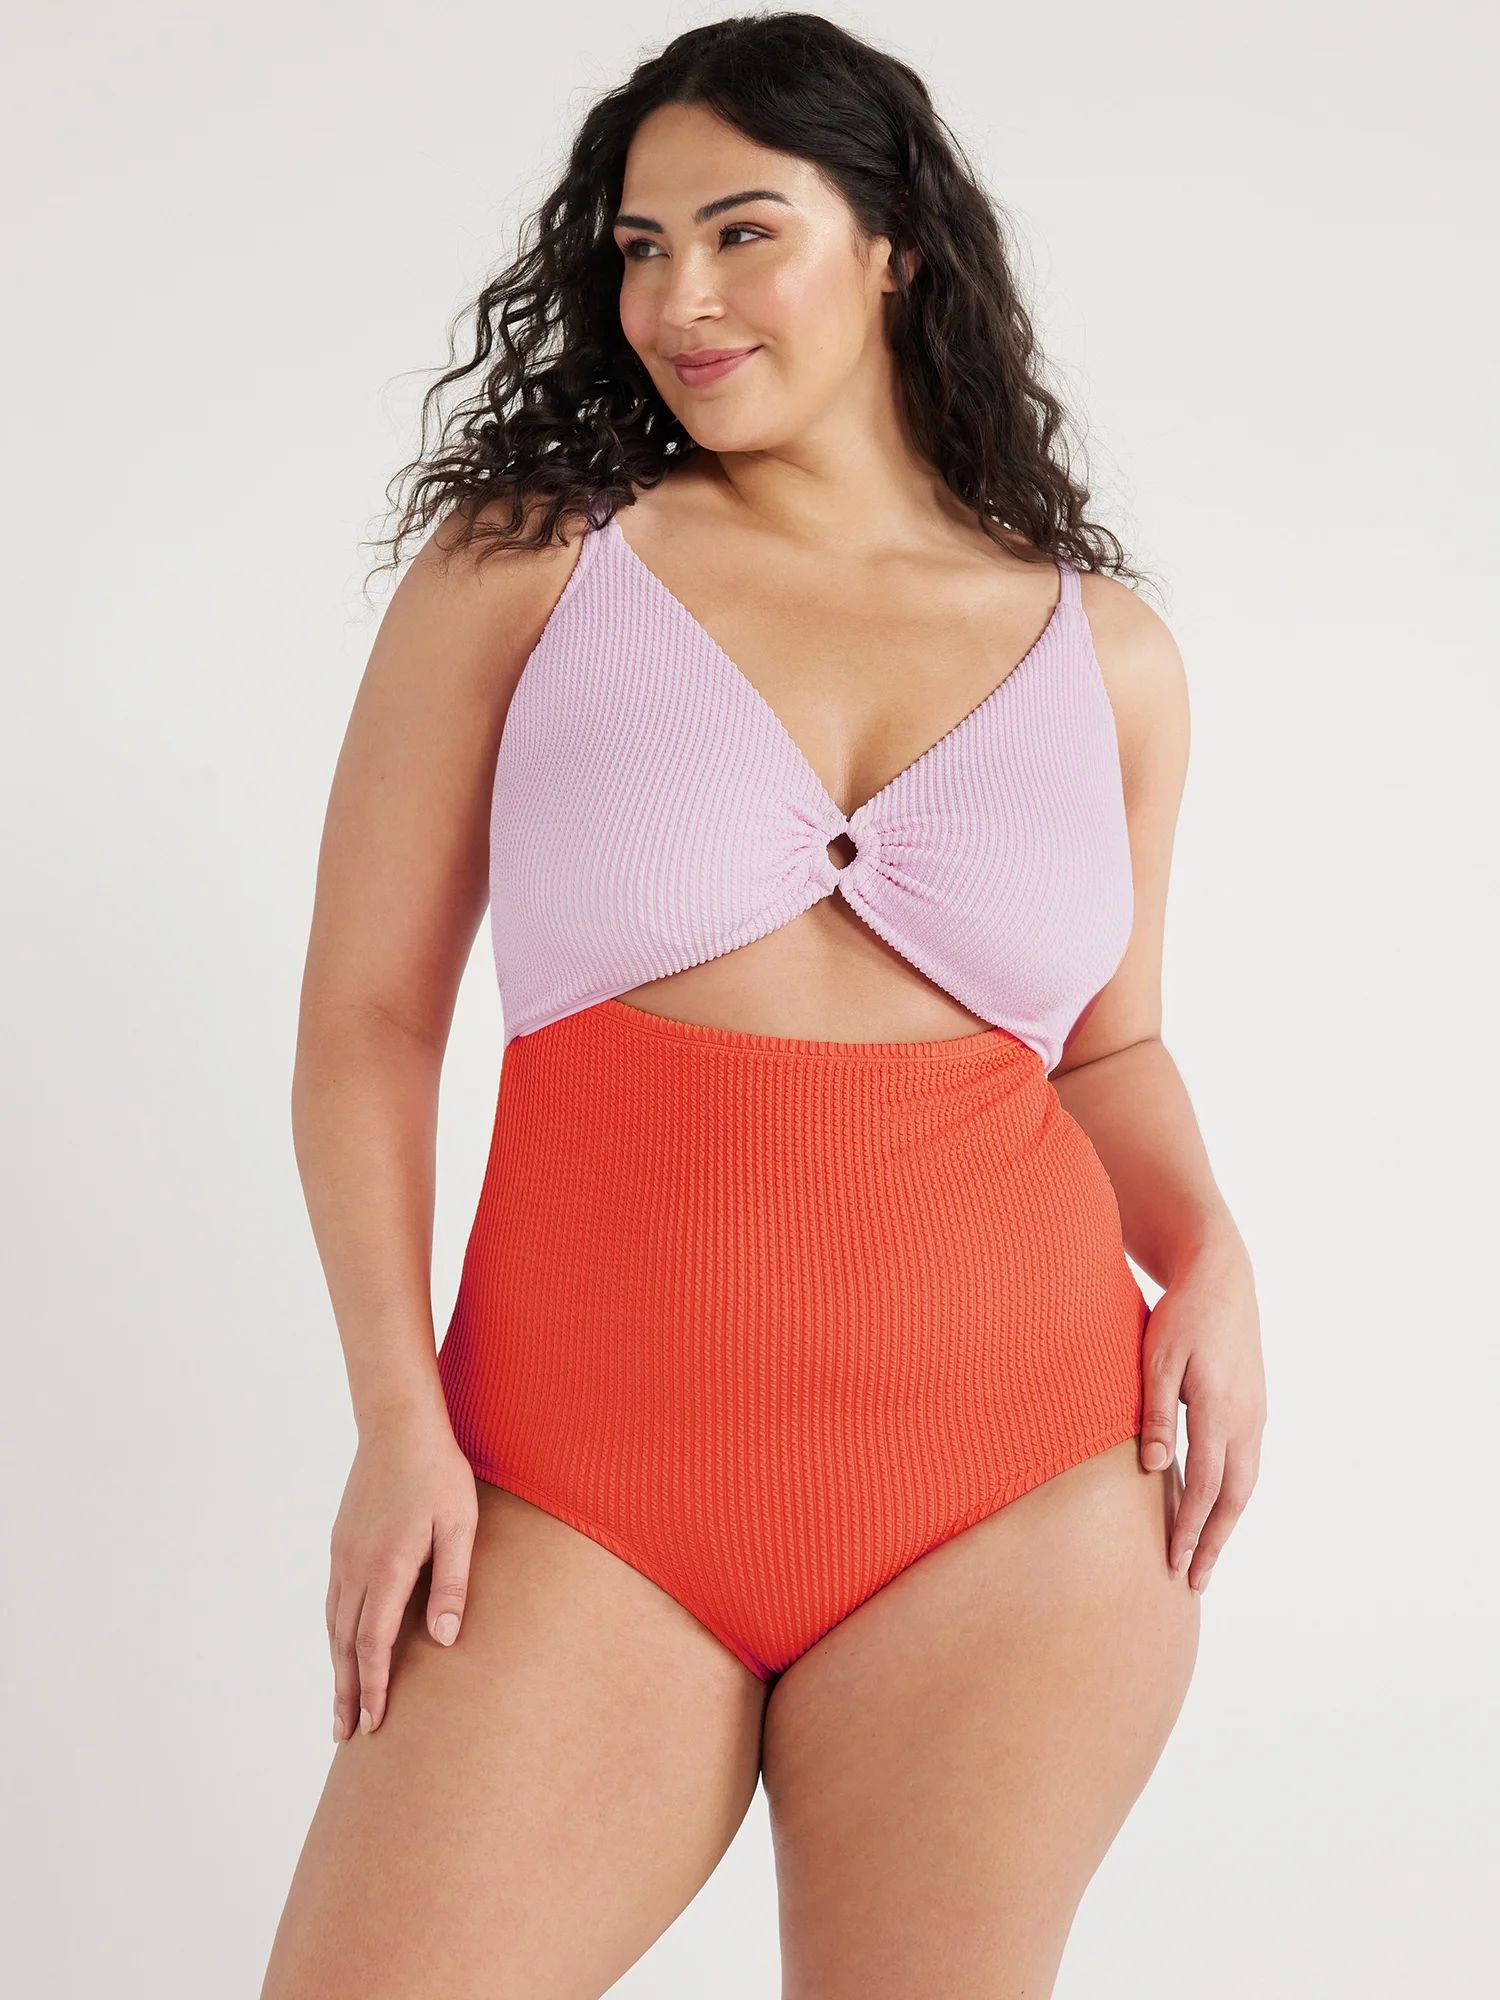 Time and Tru Women's and Plus Colorblocked Crinkle One Piece Swimsuit, Sizes XS-3X | Walmart (US)